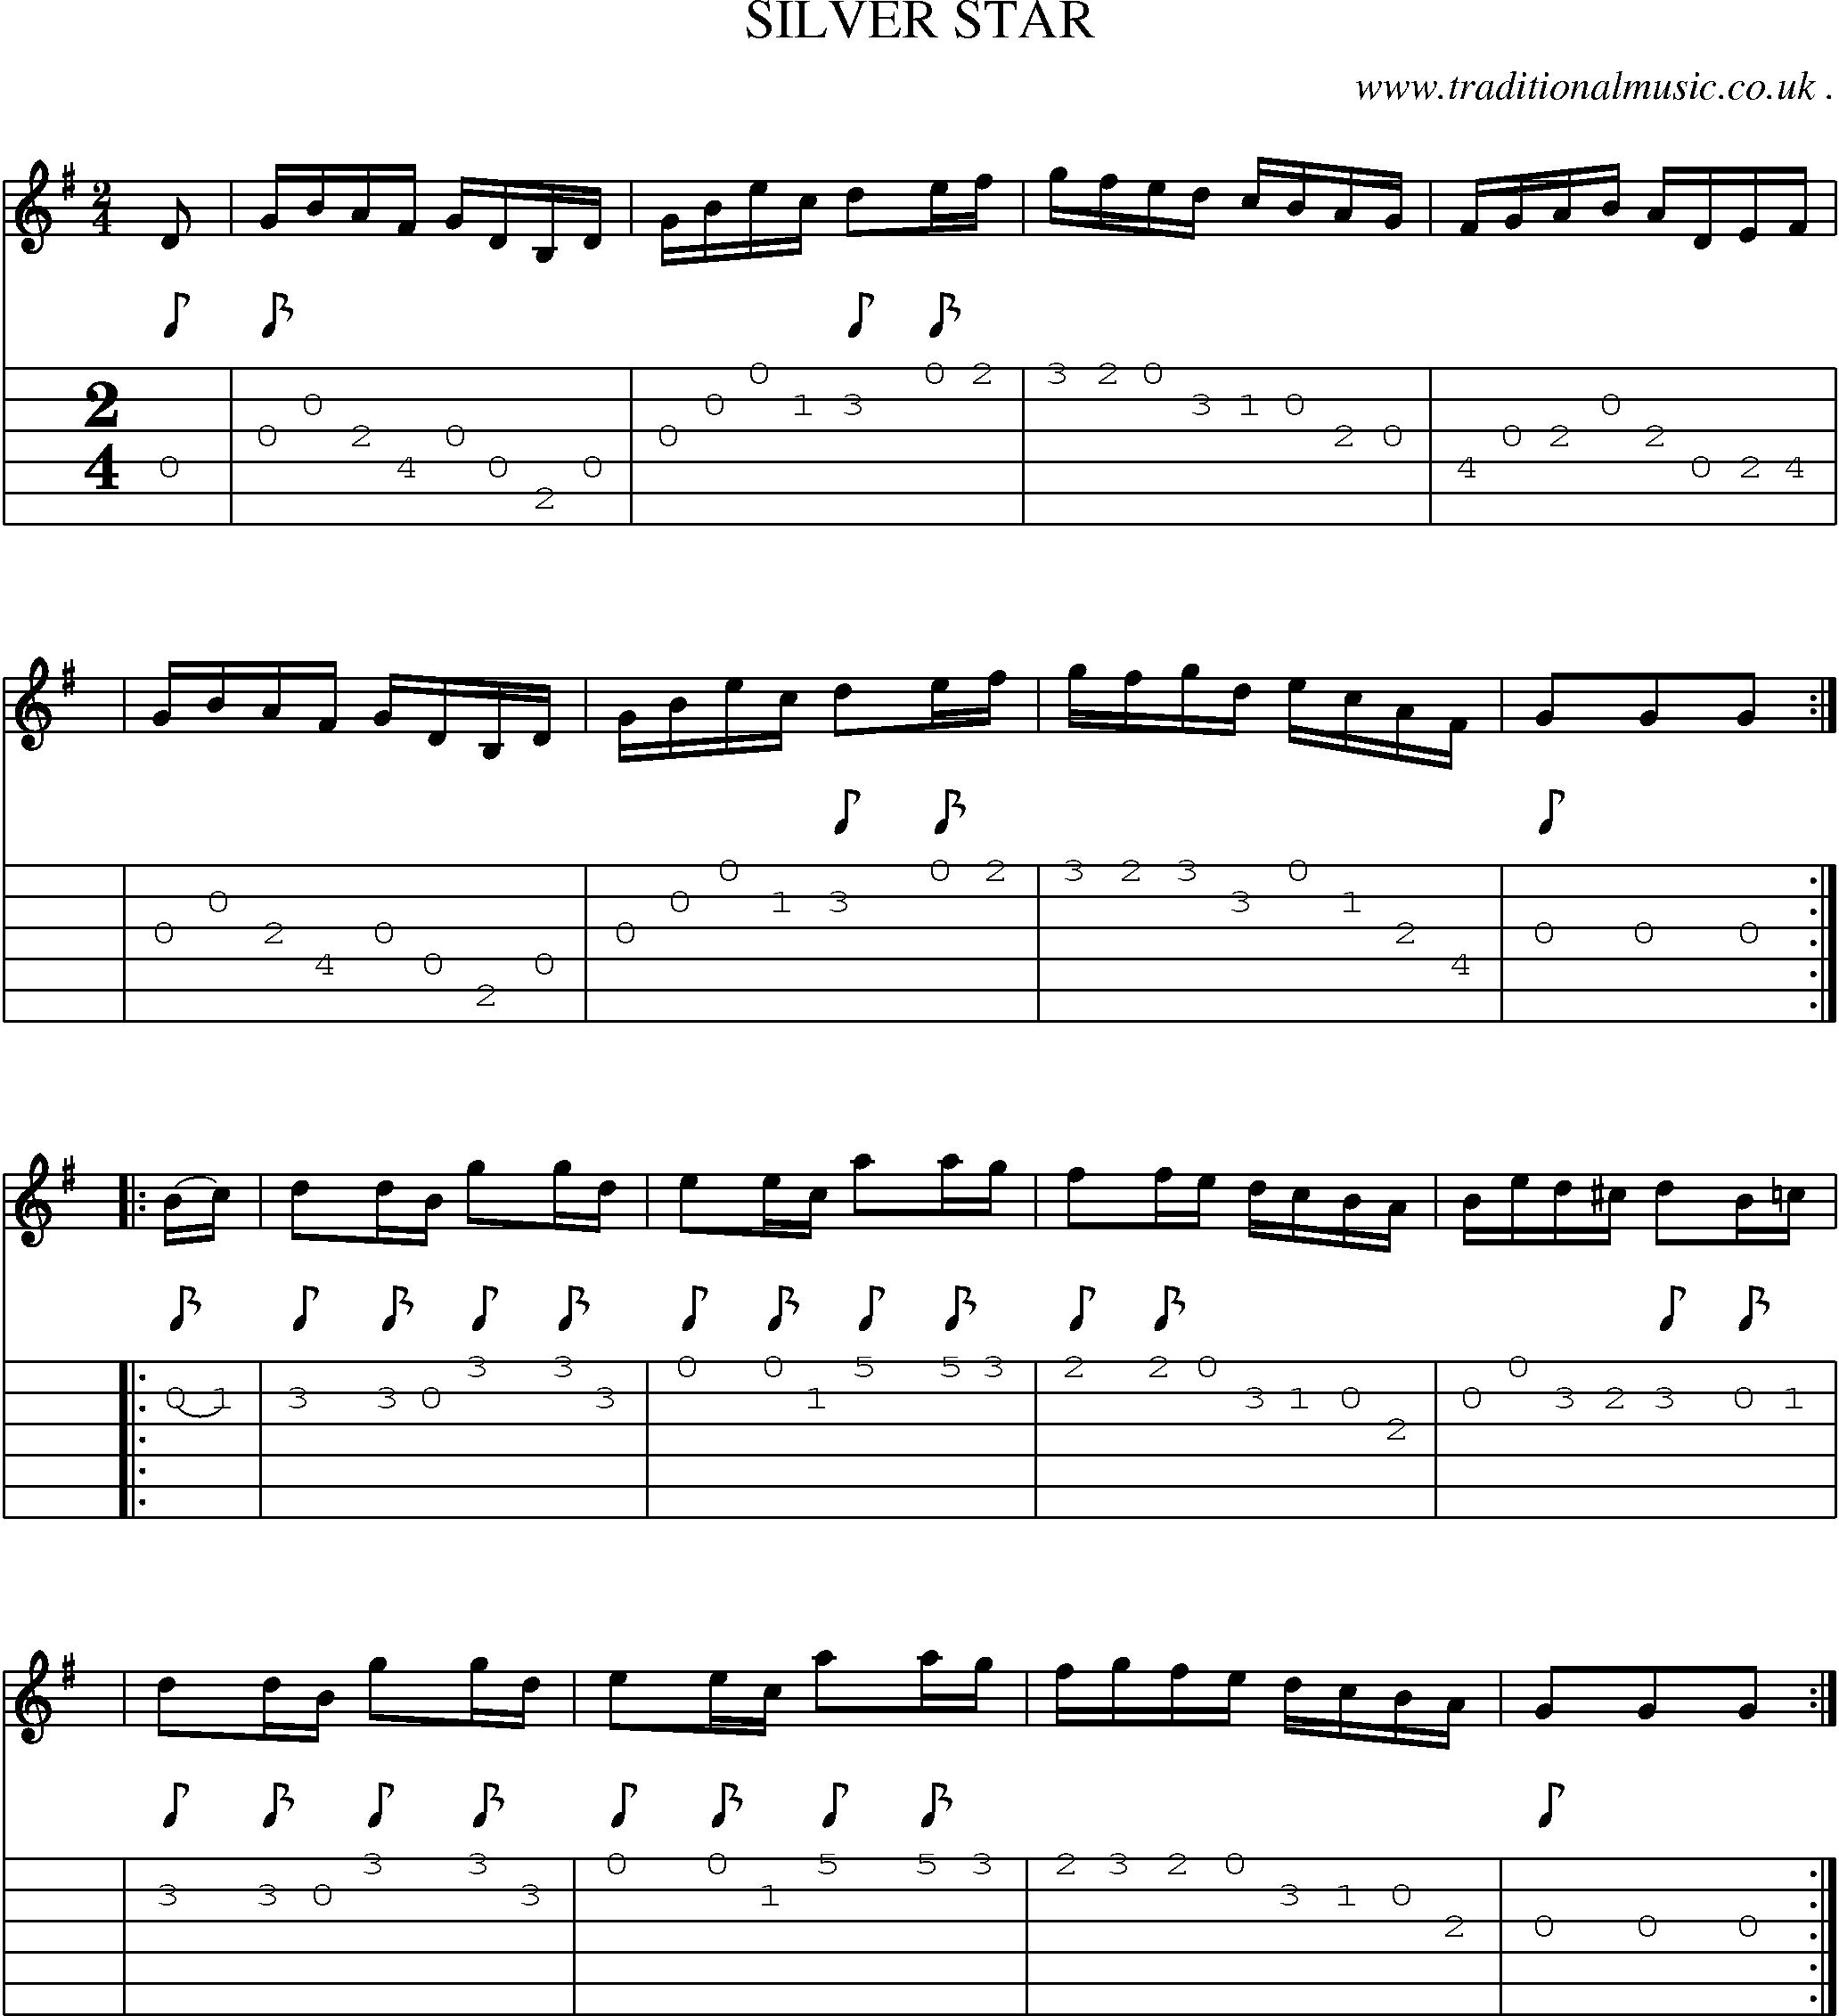 Sheet-Music and Guitar Tabs for Silver Star